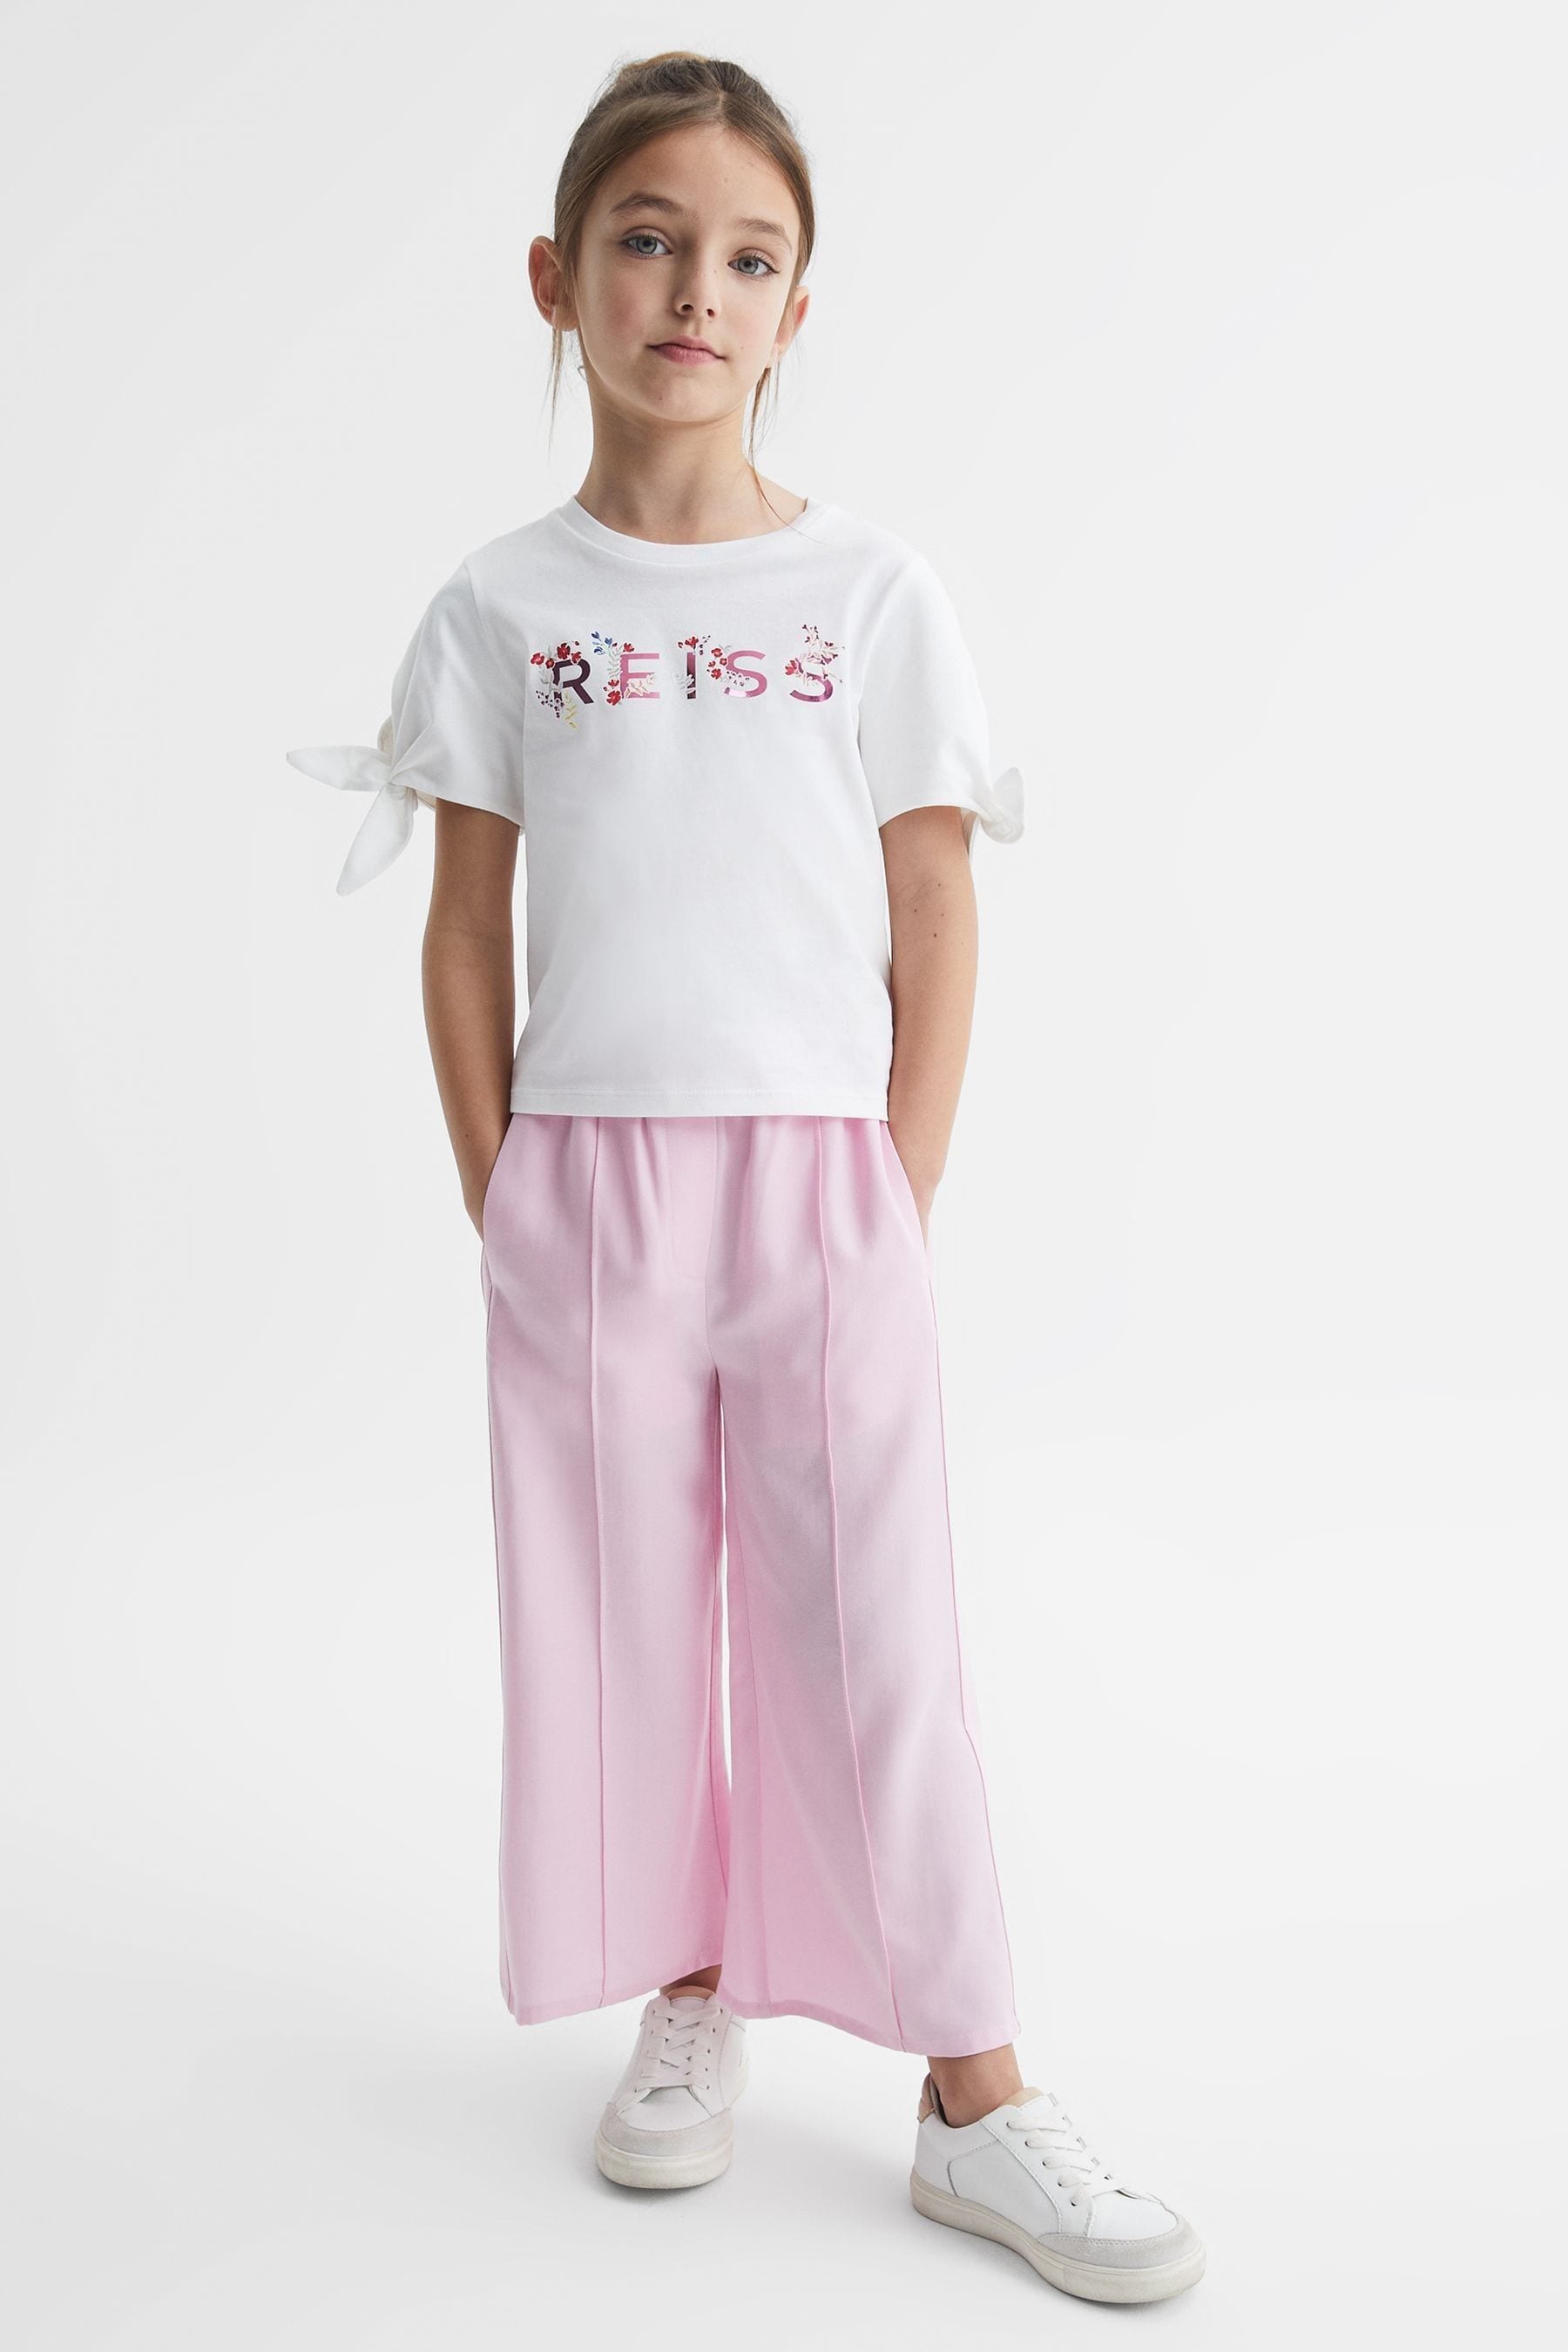 Buy Reiss Pink Print Tally Junior Printed Cotton T-Shirt from the Next ...